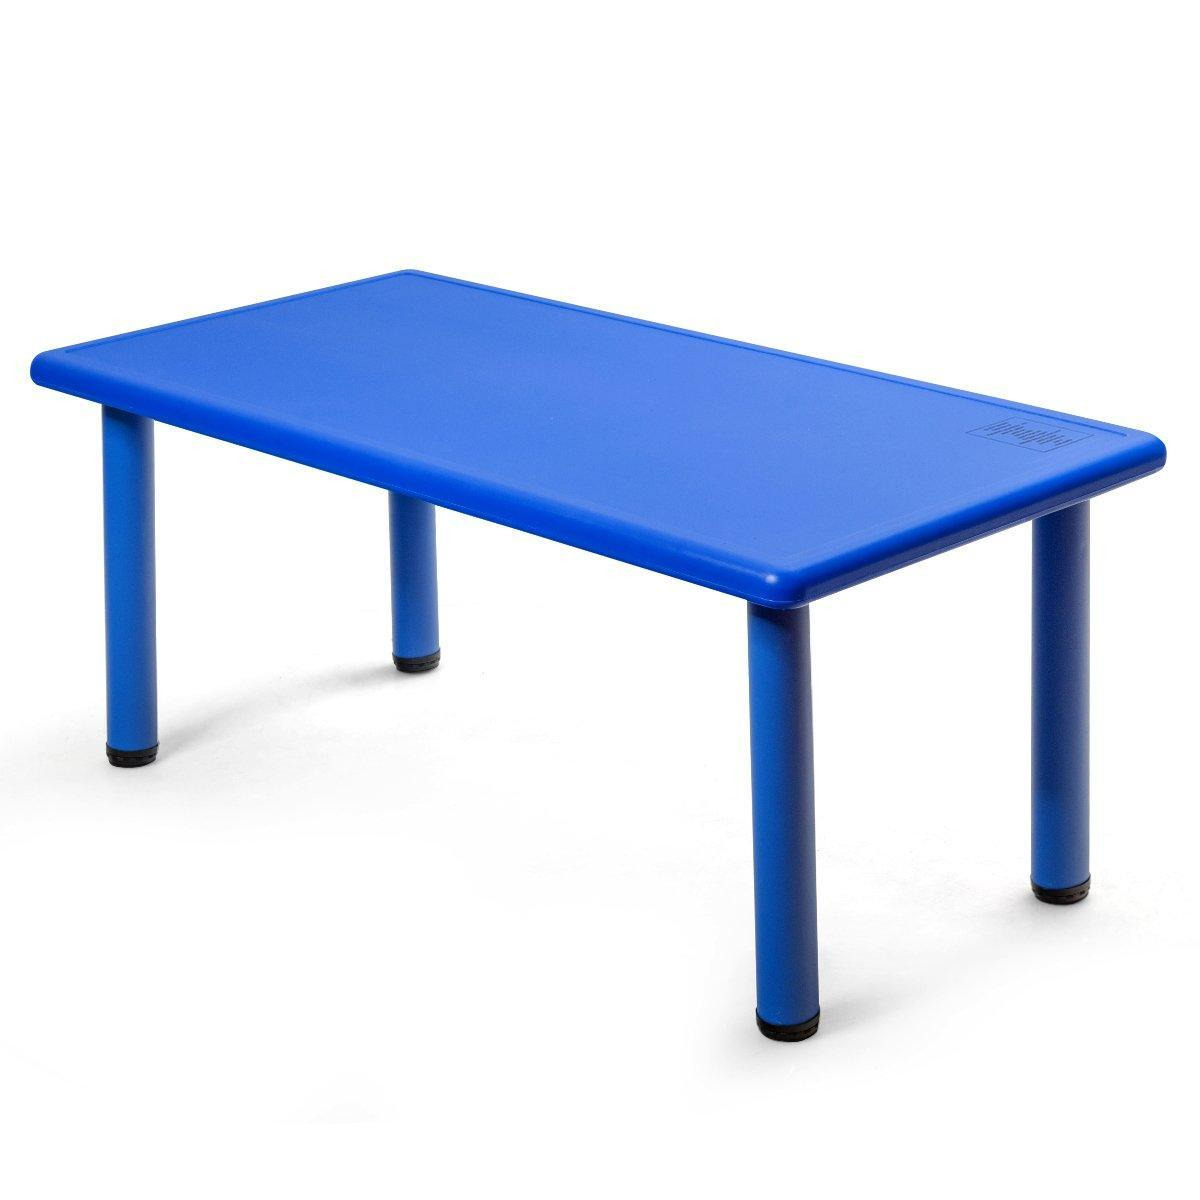 Kids Rectangular Table Dining & Play Table Indoor Outdoor Activity Table - image 1